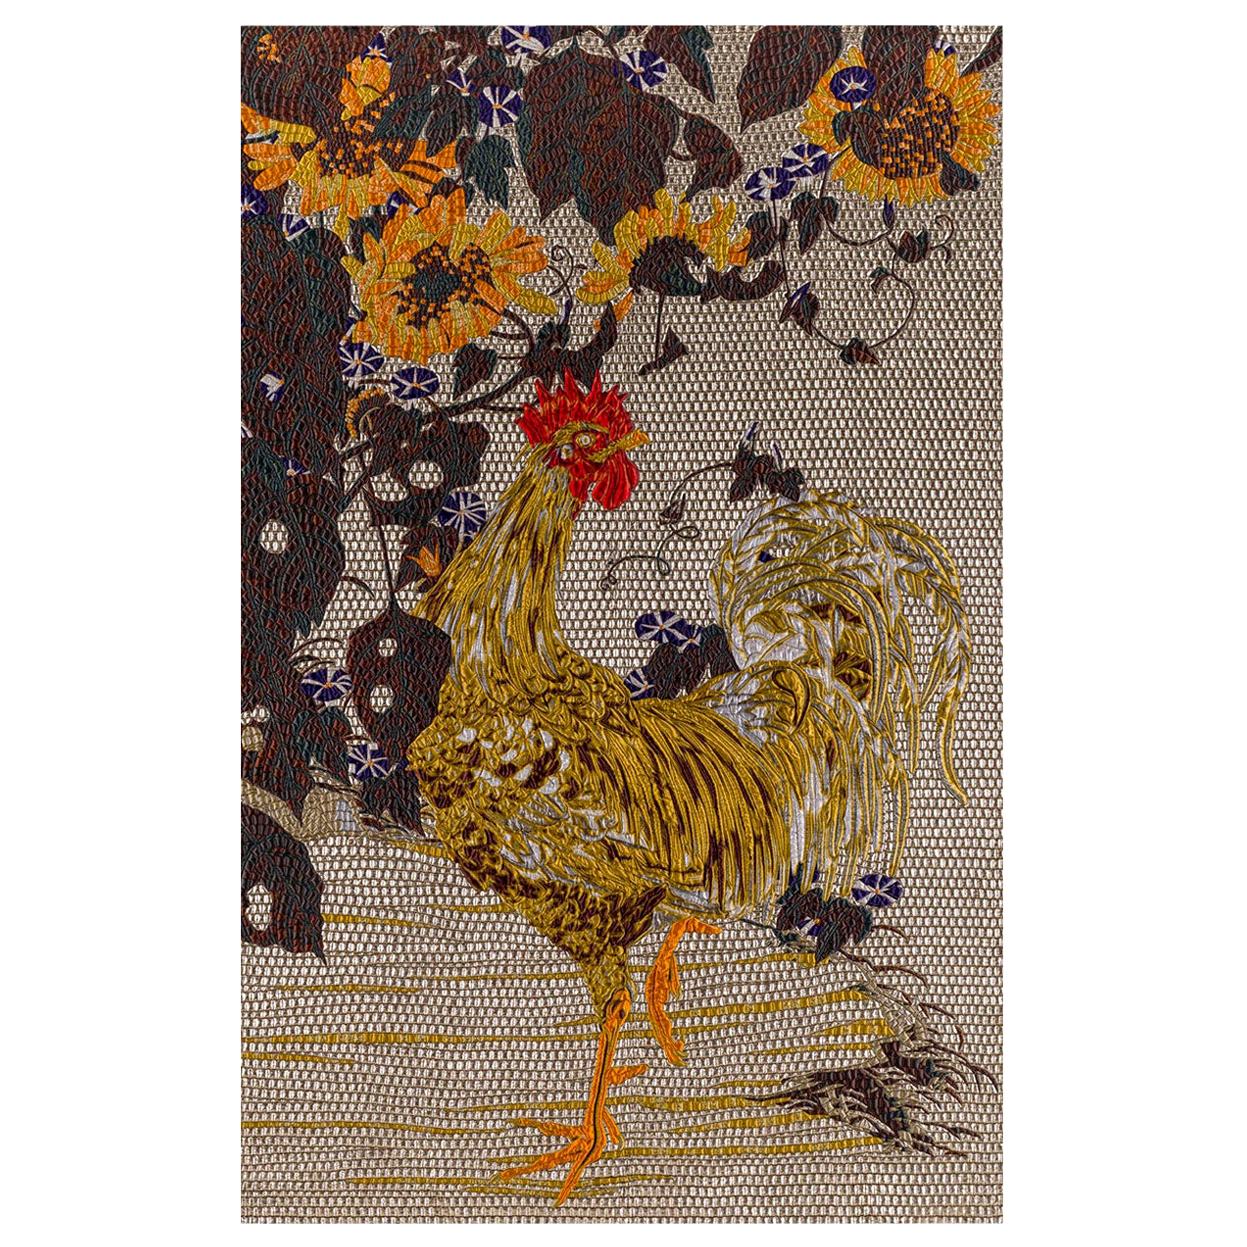  Fabric Tapestry with Rooster Design Upholstered Panel on Demand